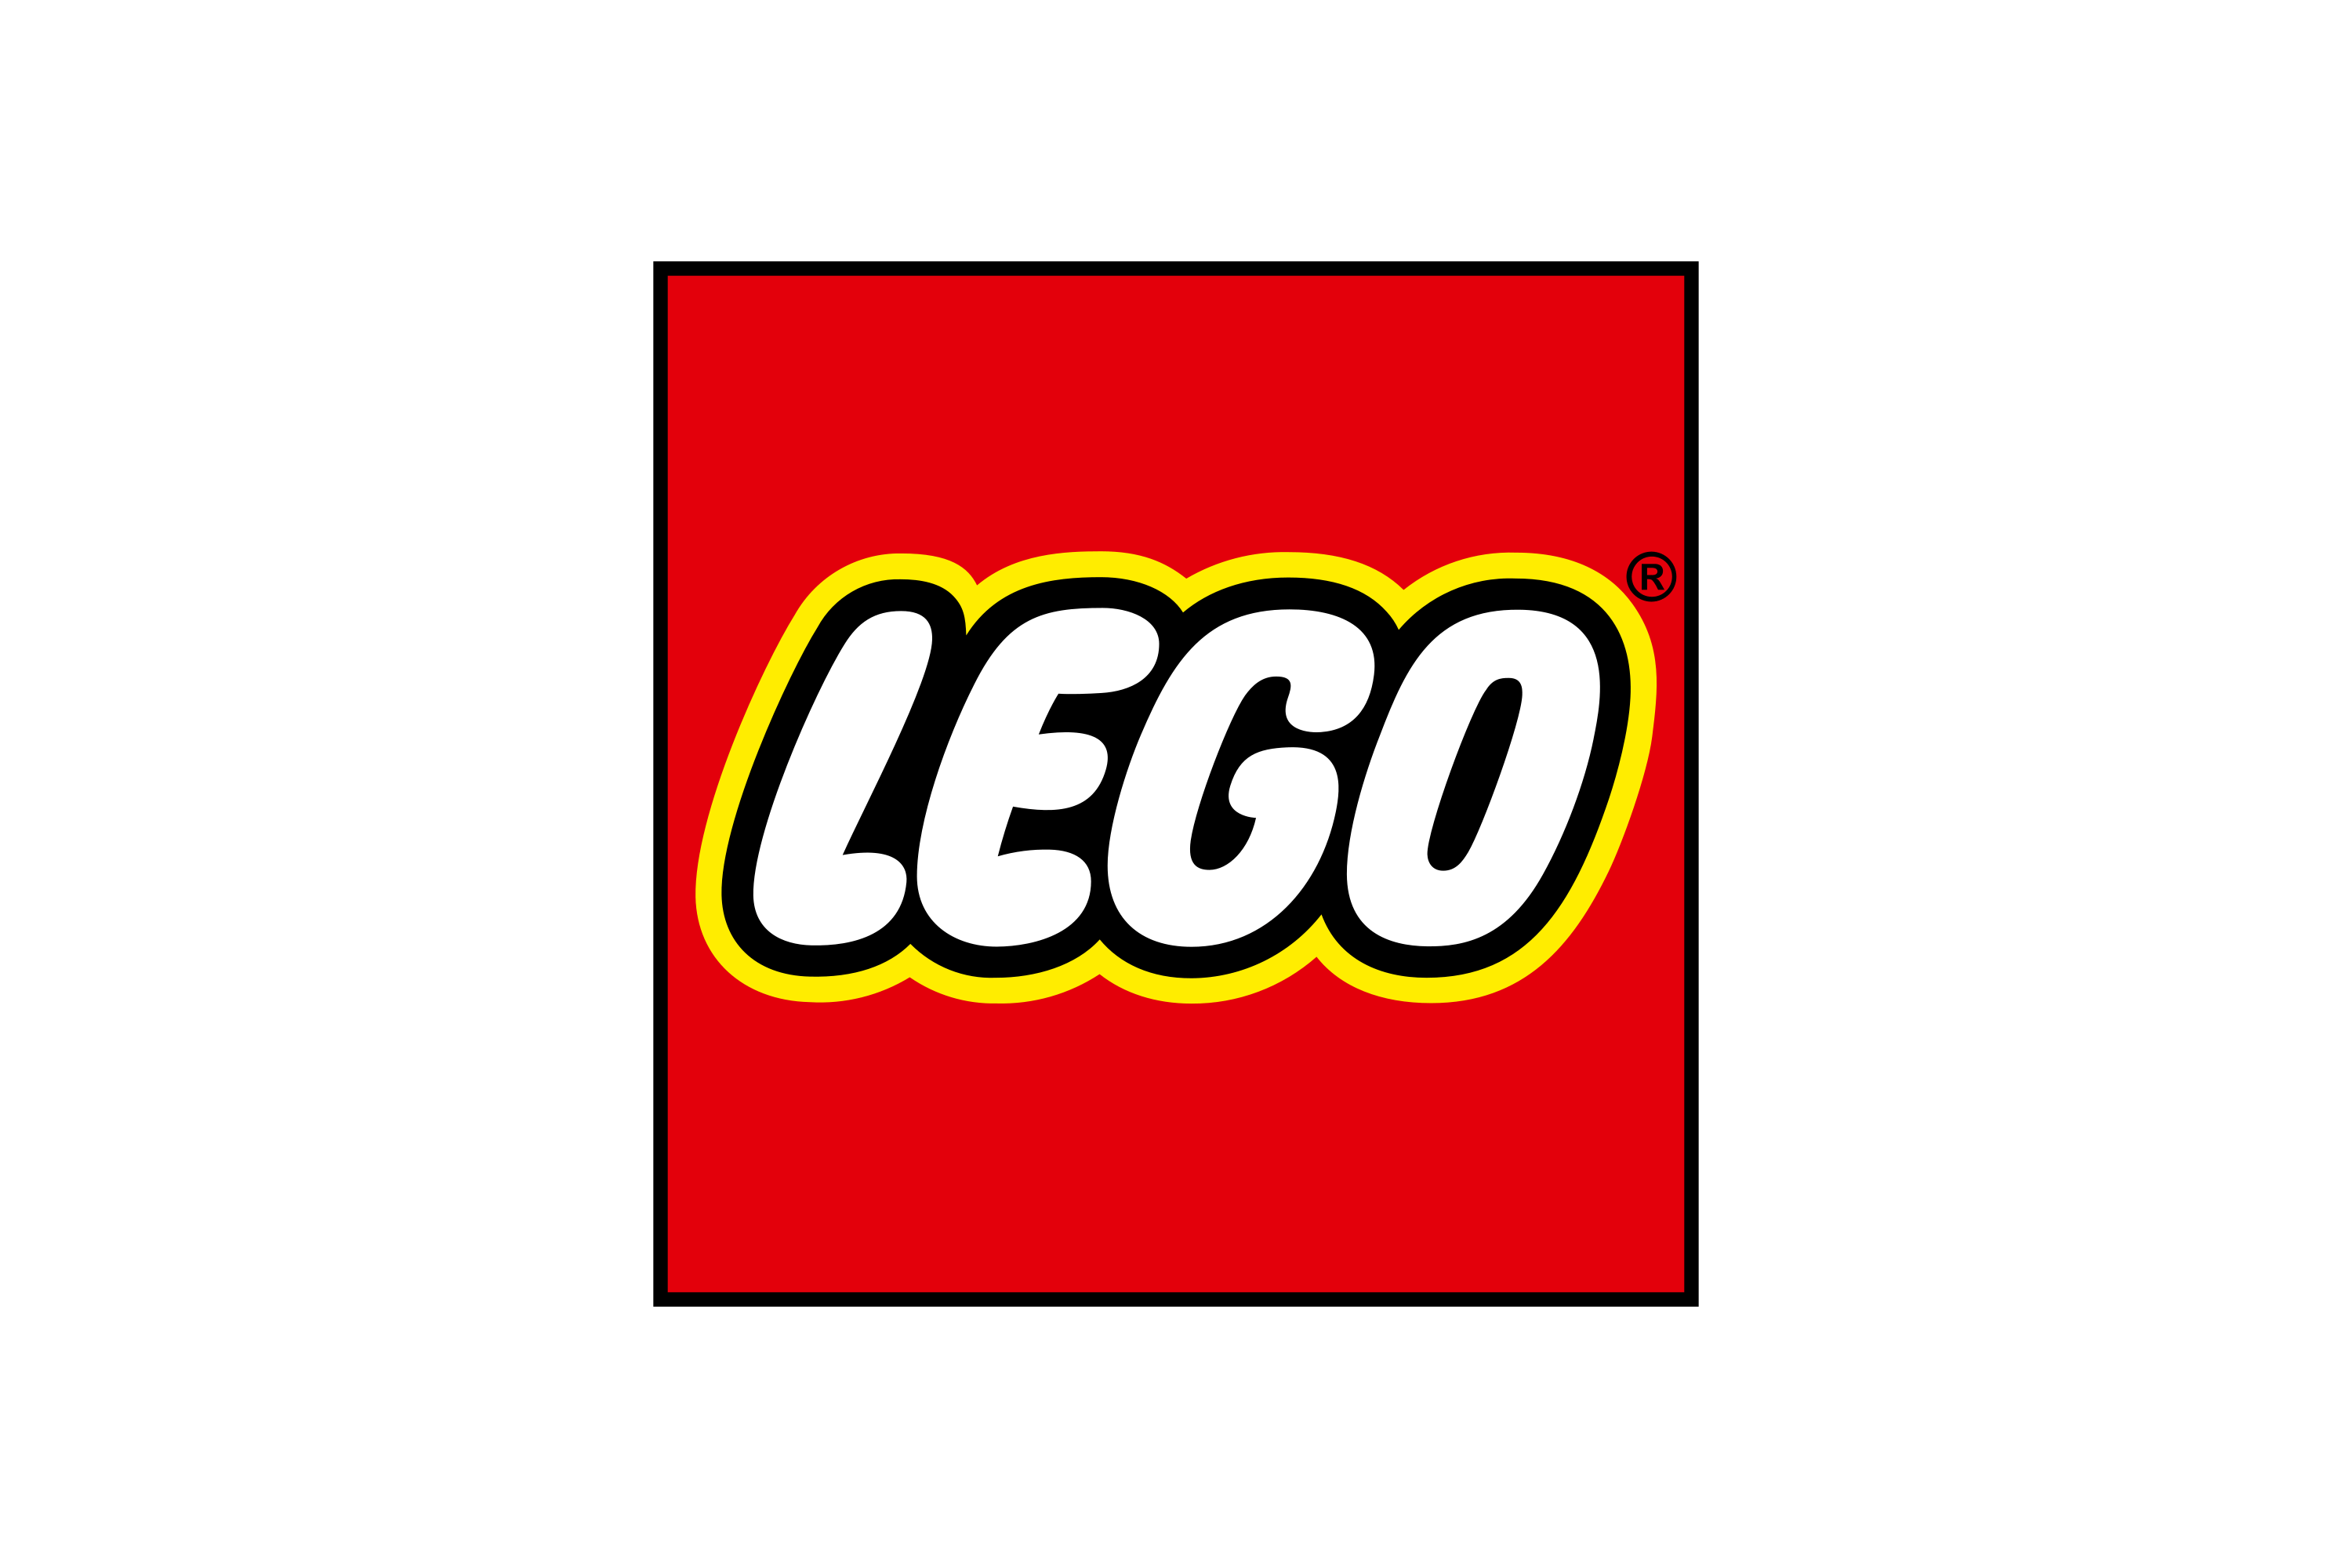 Download The Lego Group (Lego A/S) Logo in SVG Vector or PNG File Format 